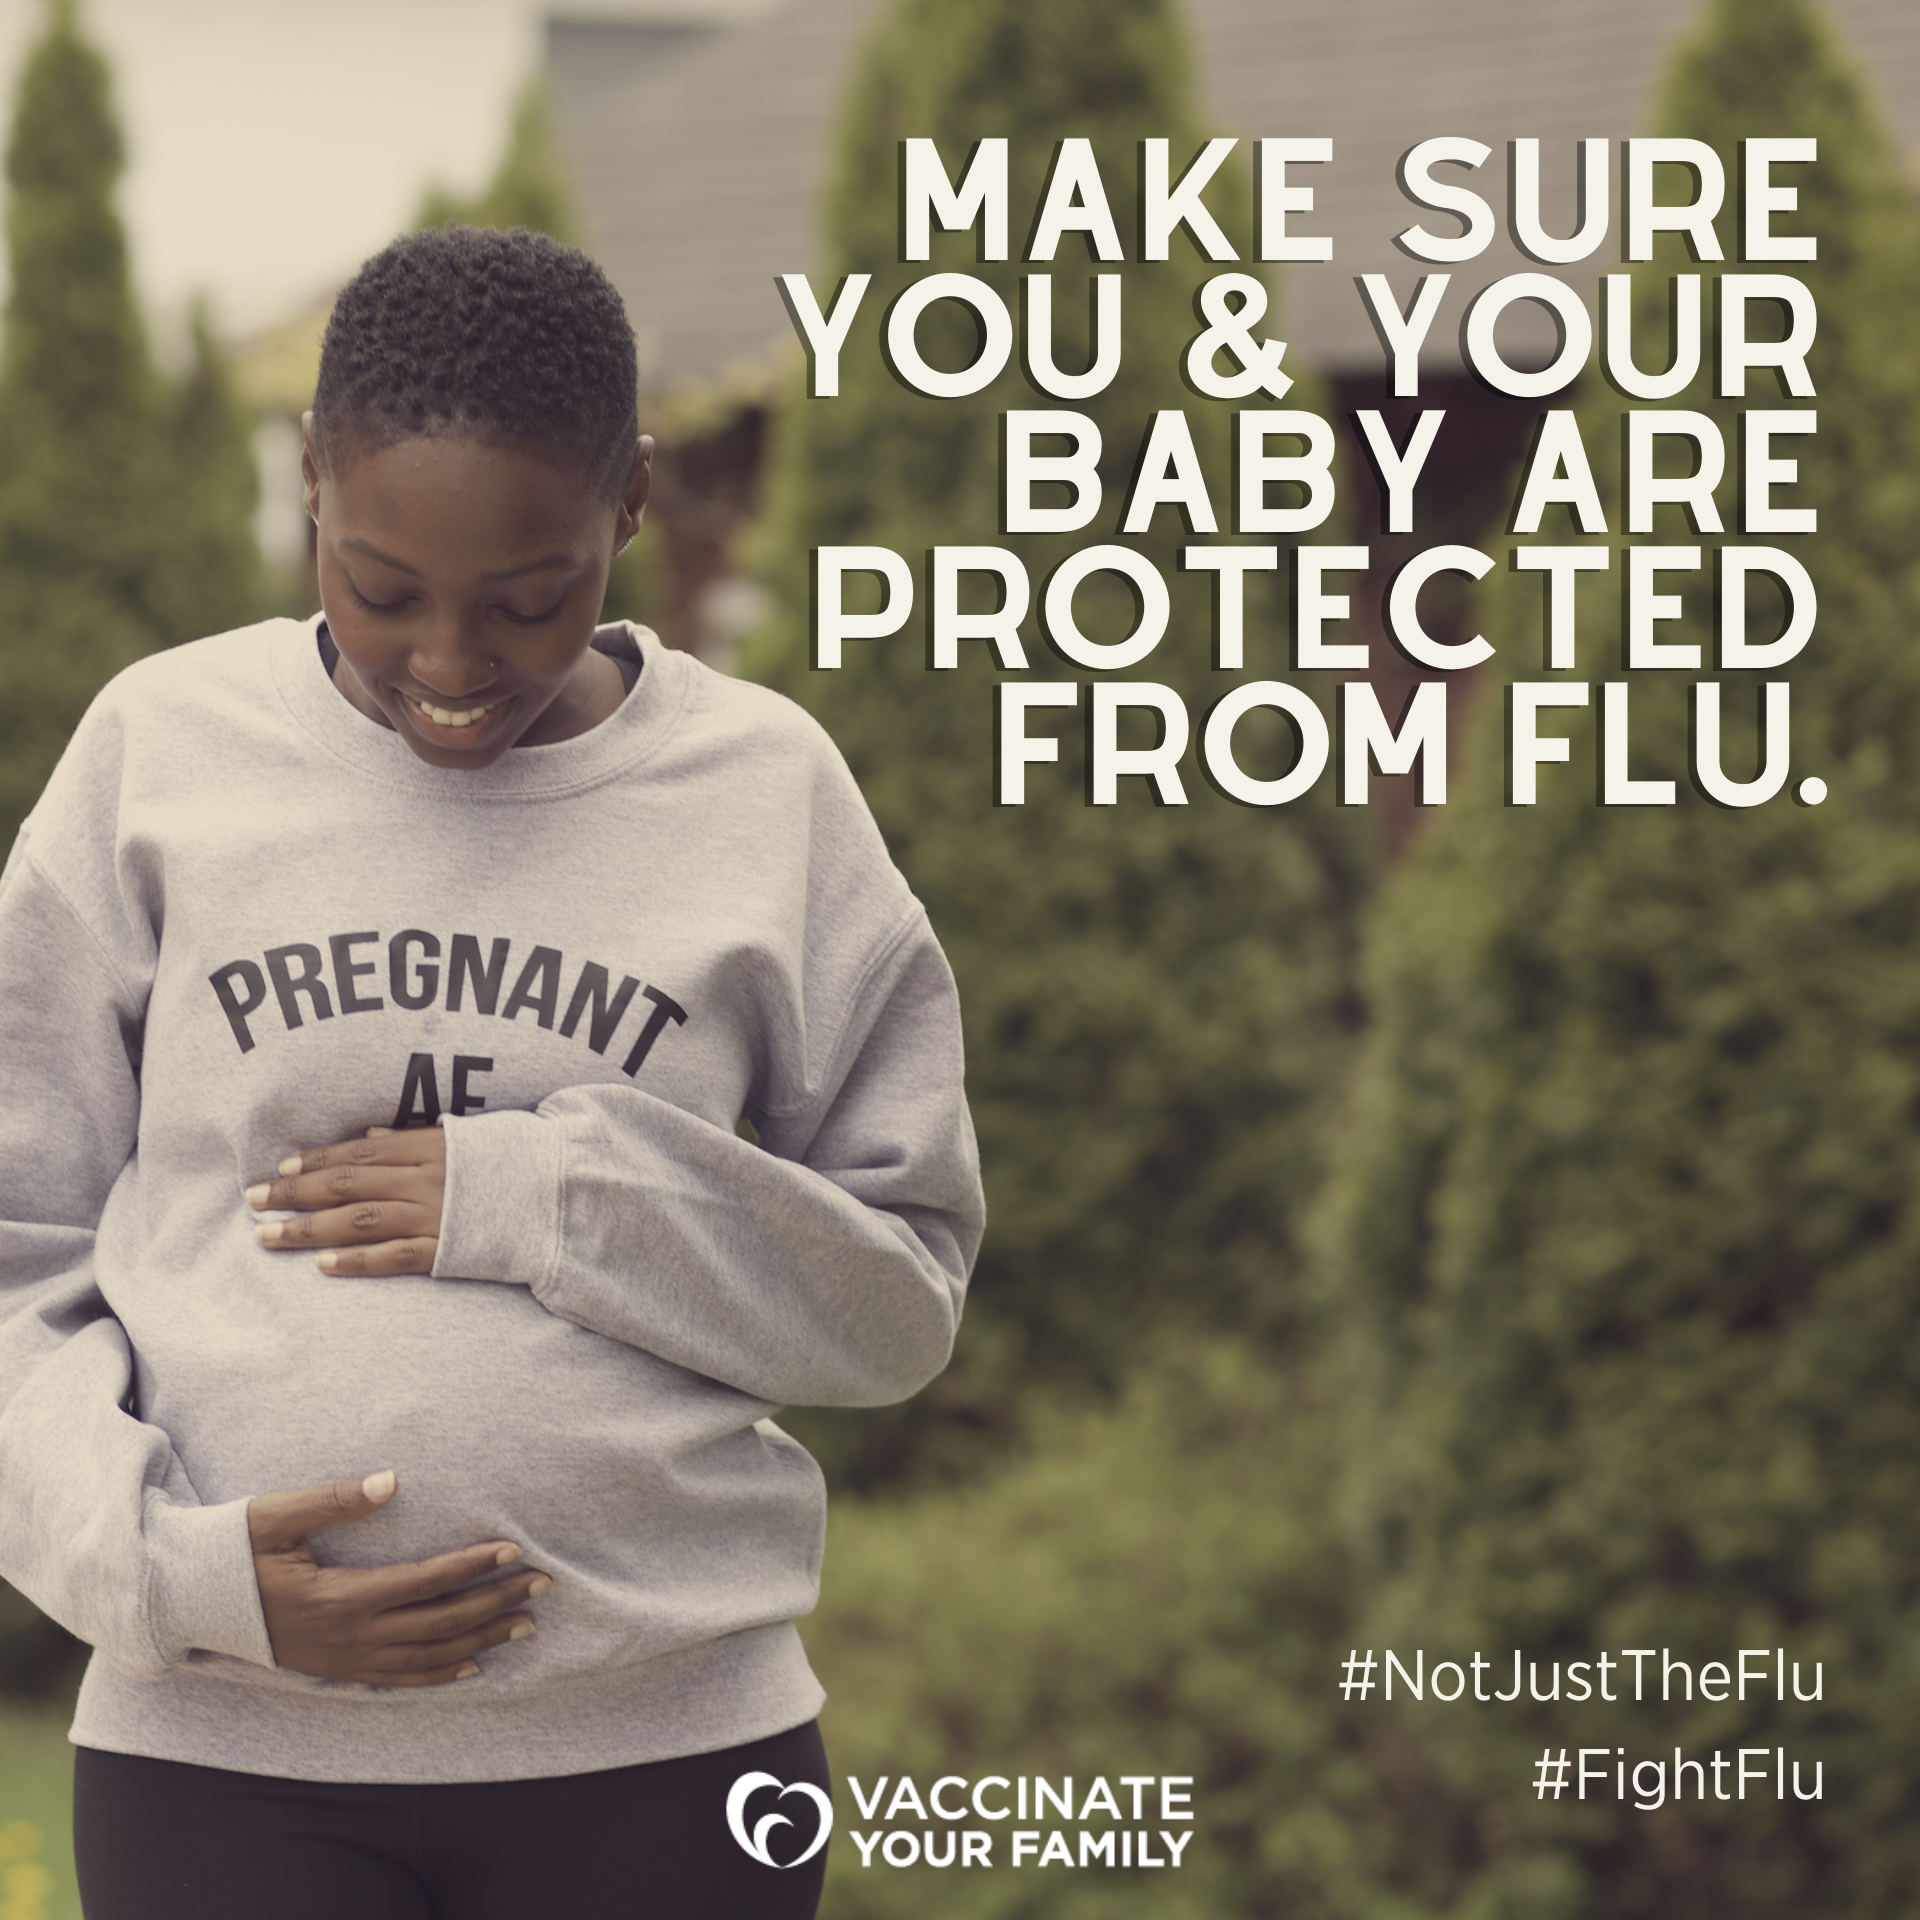 A background of blurred trees with a Black woman in a sweatshirt holding both her hands around her pregnant belly. Text is in white and Vaccinate Your Family logo and flu campaign hashtags are at the bottom.